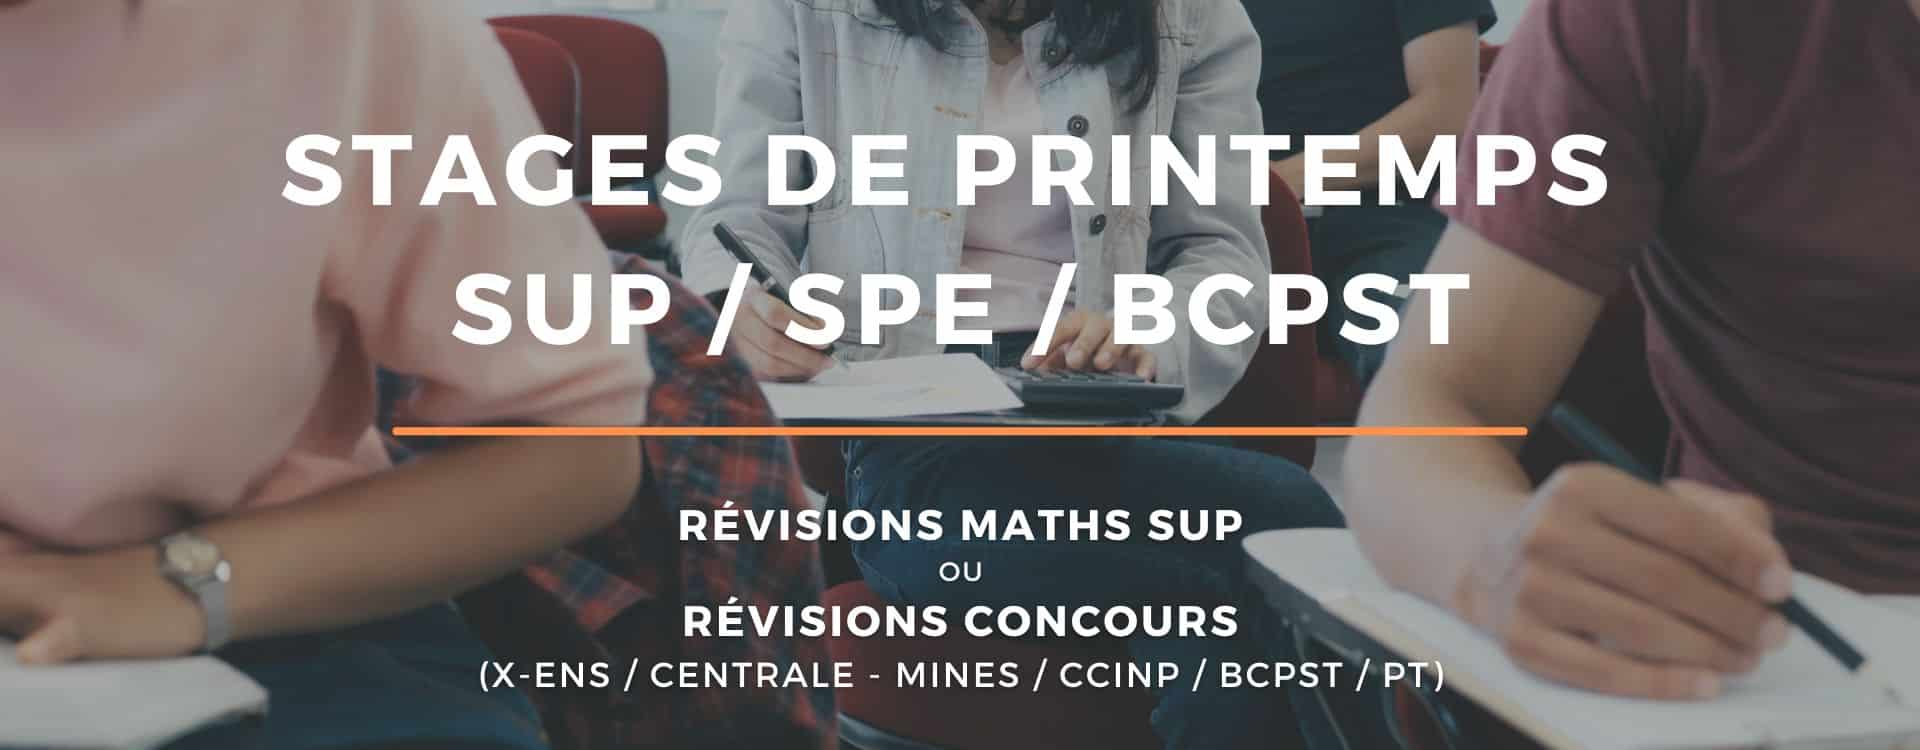 stages révisions concours sup spe